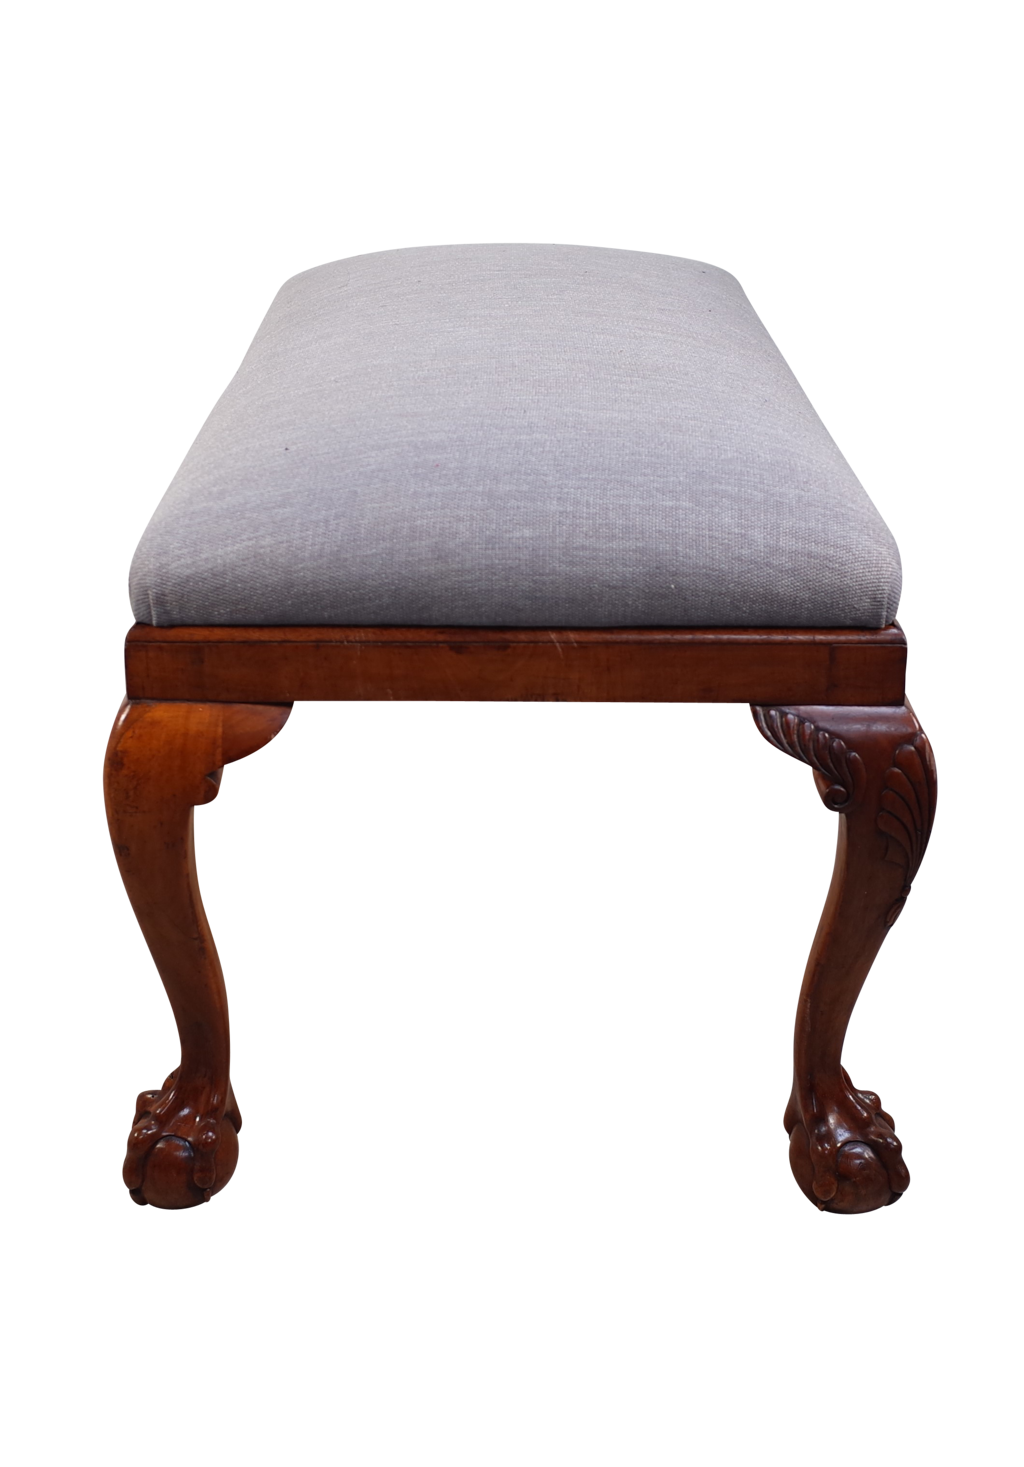 Upholstered Walnut Stool on Cabriole Legs with Ball and Claw Feet